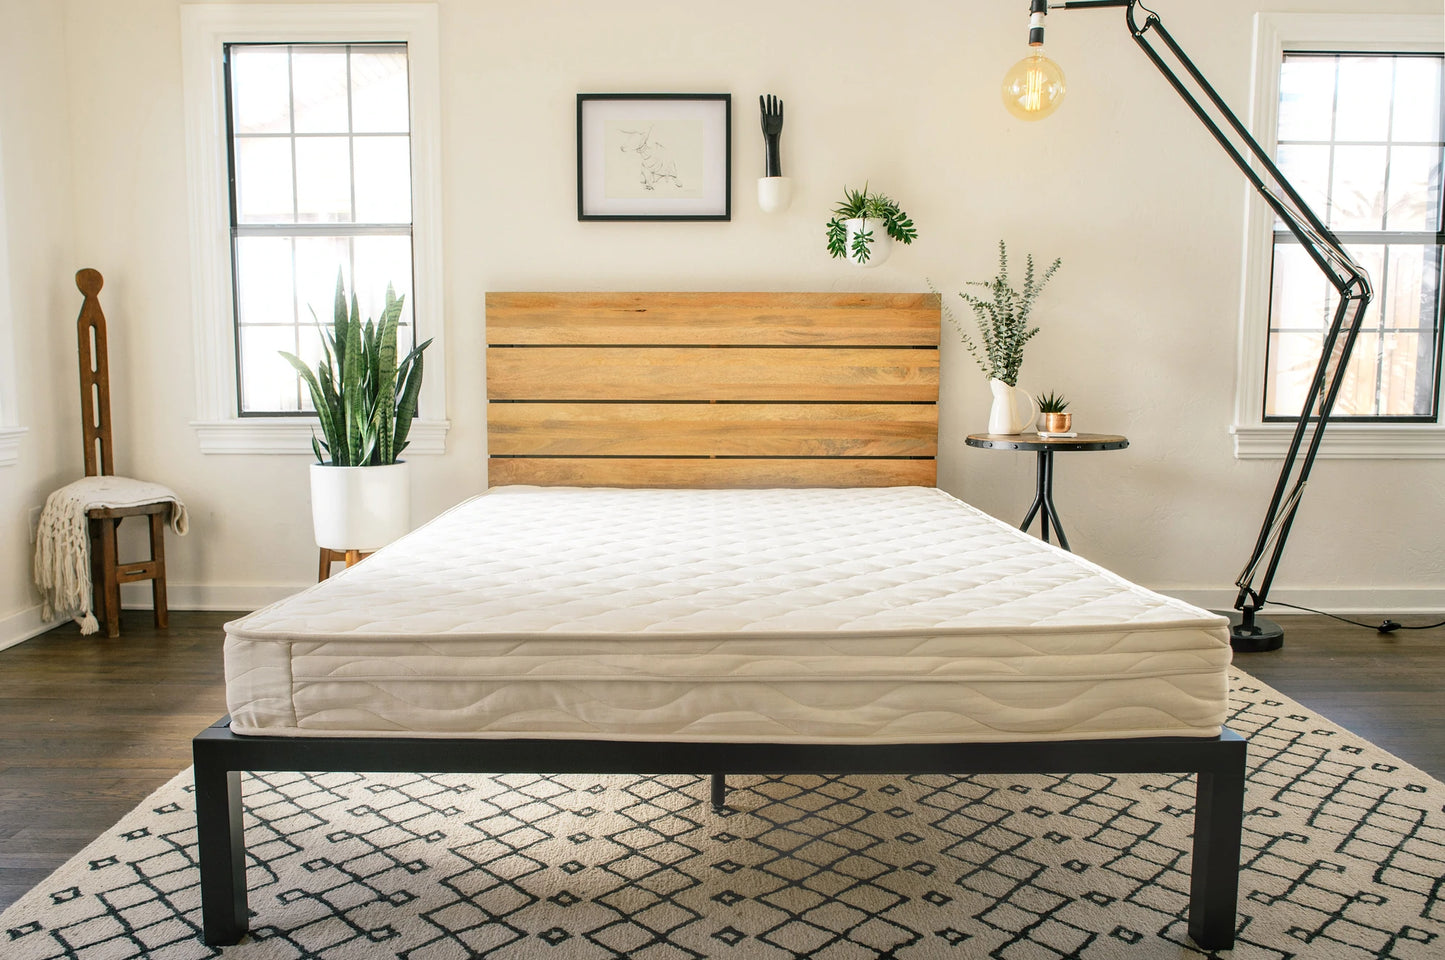 The Metta® - Certified Organic Latex Mattress with Two-Layer, Custom-Comfort System